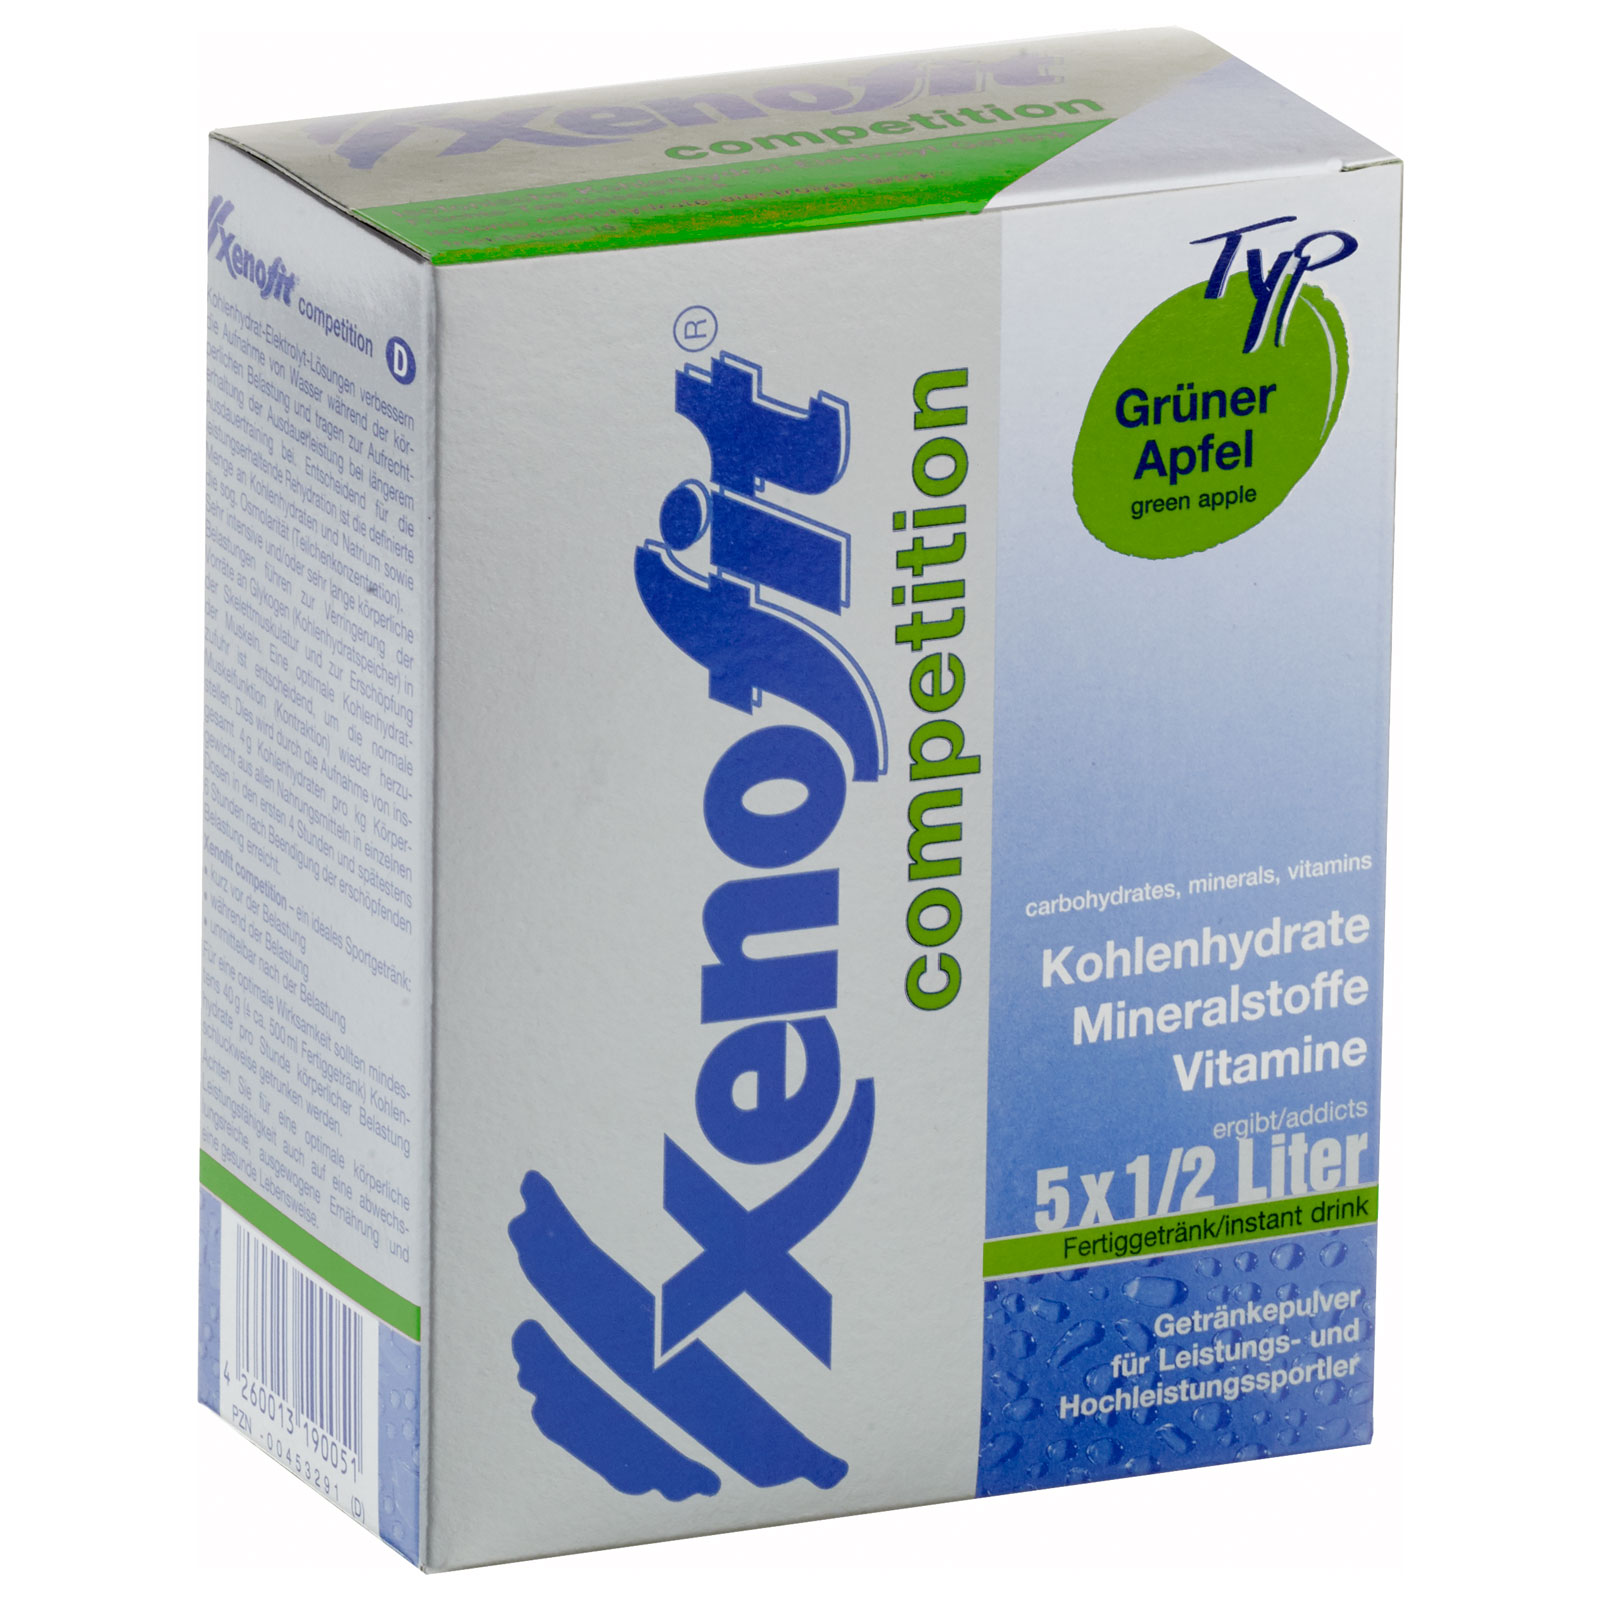 Productfoto van Xenofit Competition Green Apple - Isotonic Carbohydrate Drink - 5x42g